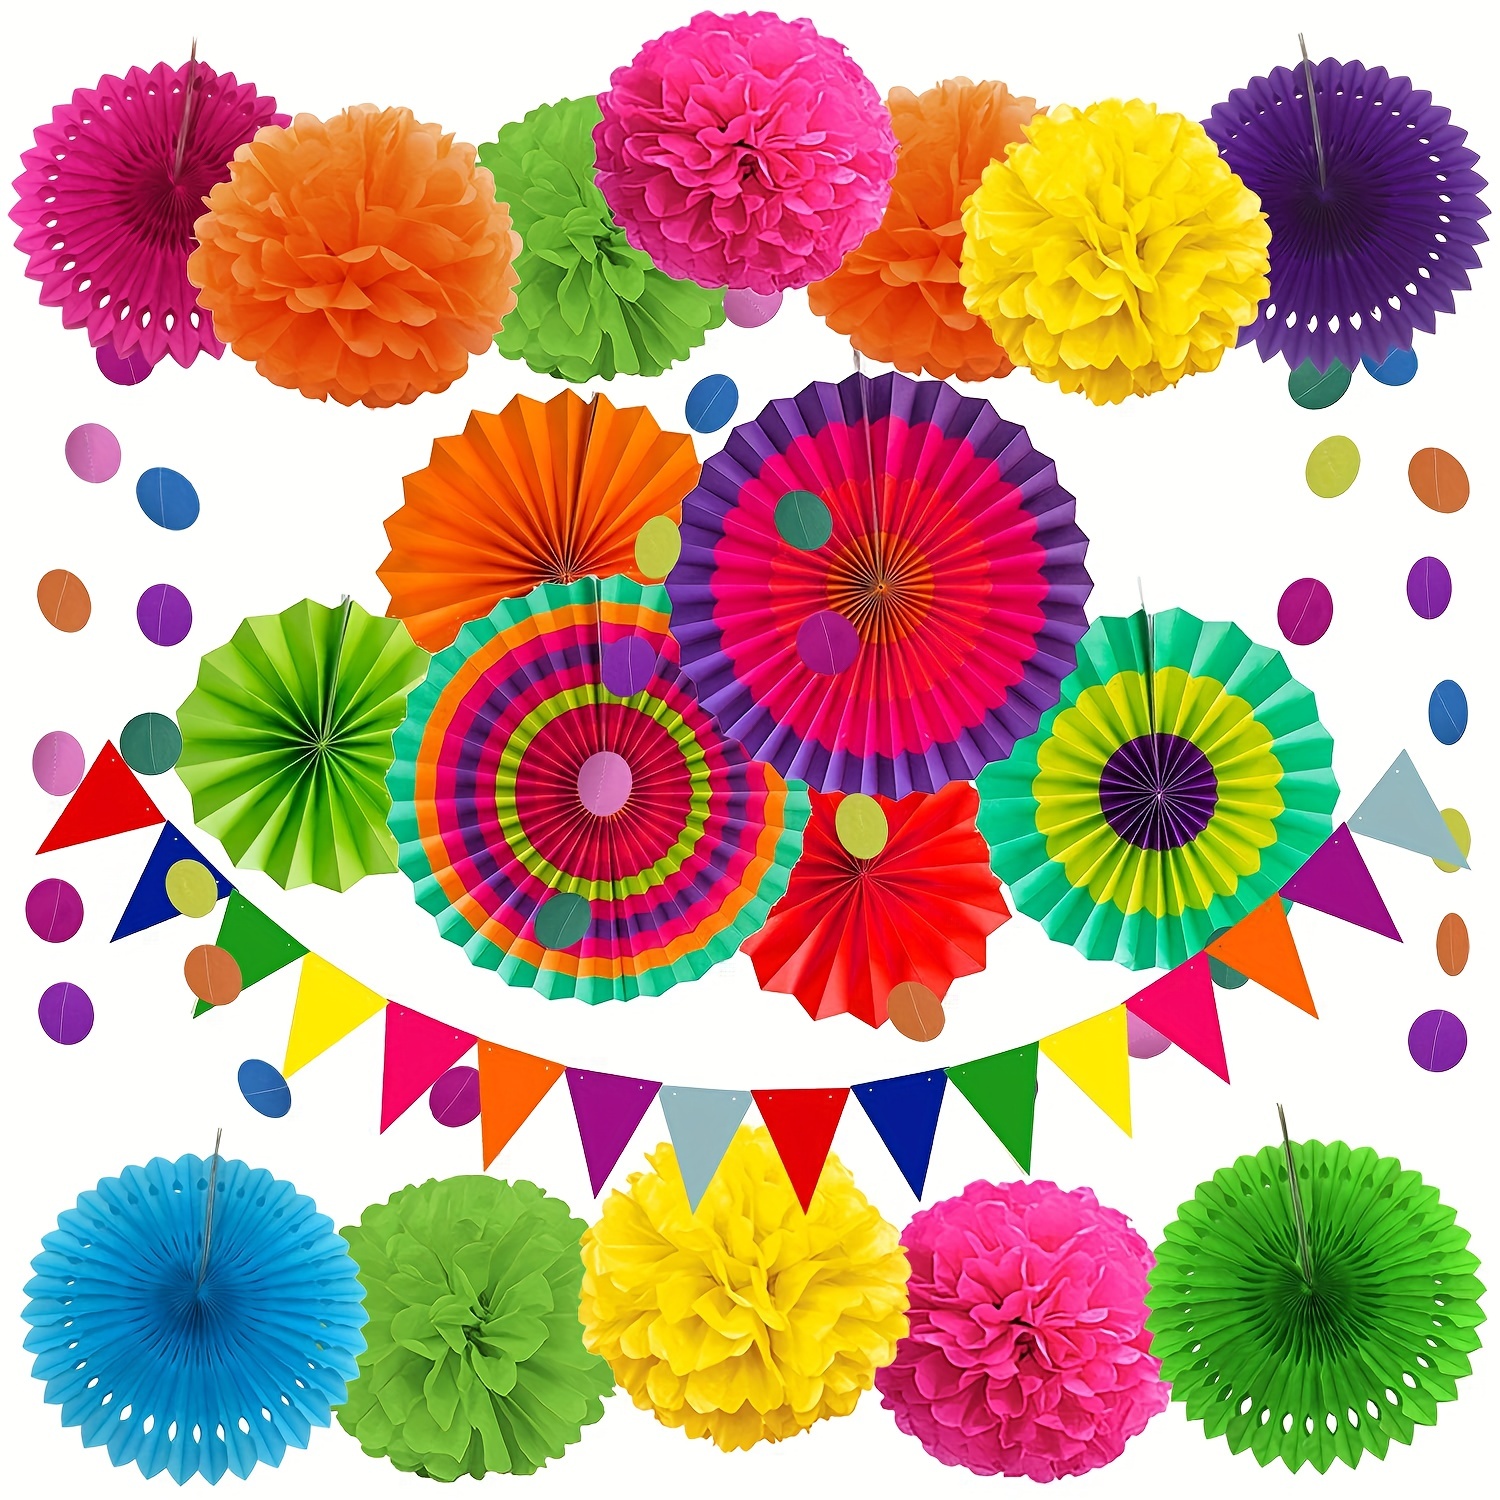 

20-piece Colorful Fiesta Paper Fan & Tissue Paper Pom Pom Set - Perfect For Birthday, Wedding, Fiesta, Or Mexican Party Decorations! Easter Gift Halloween Gift